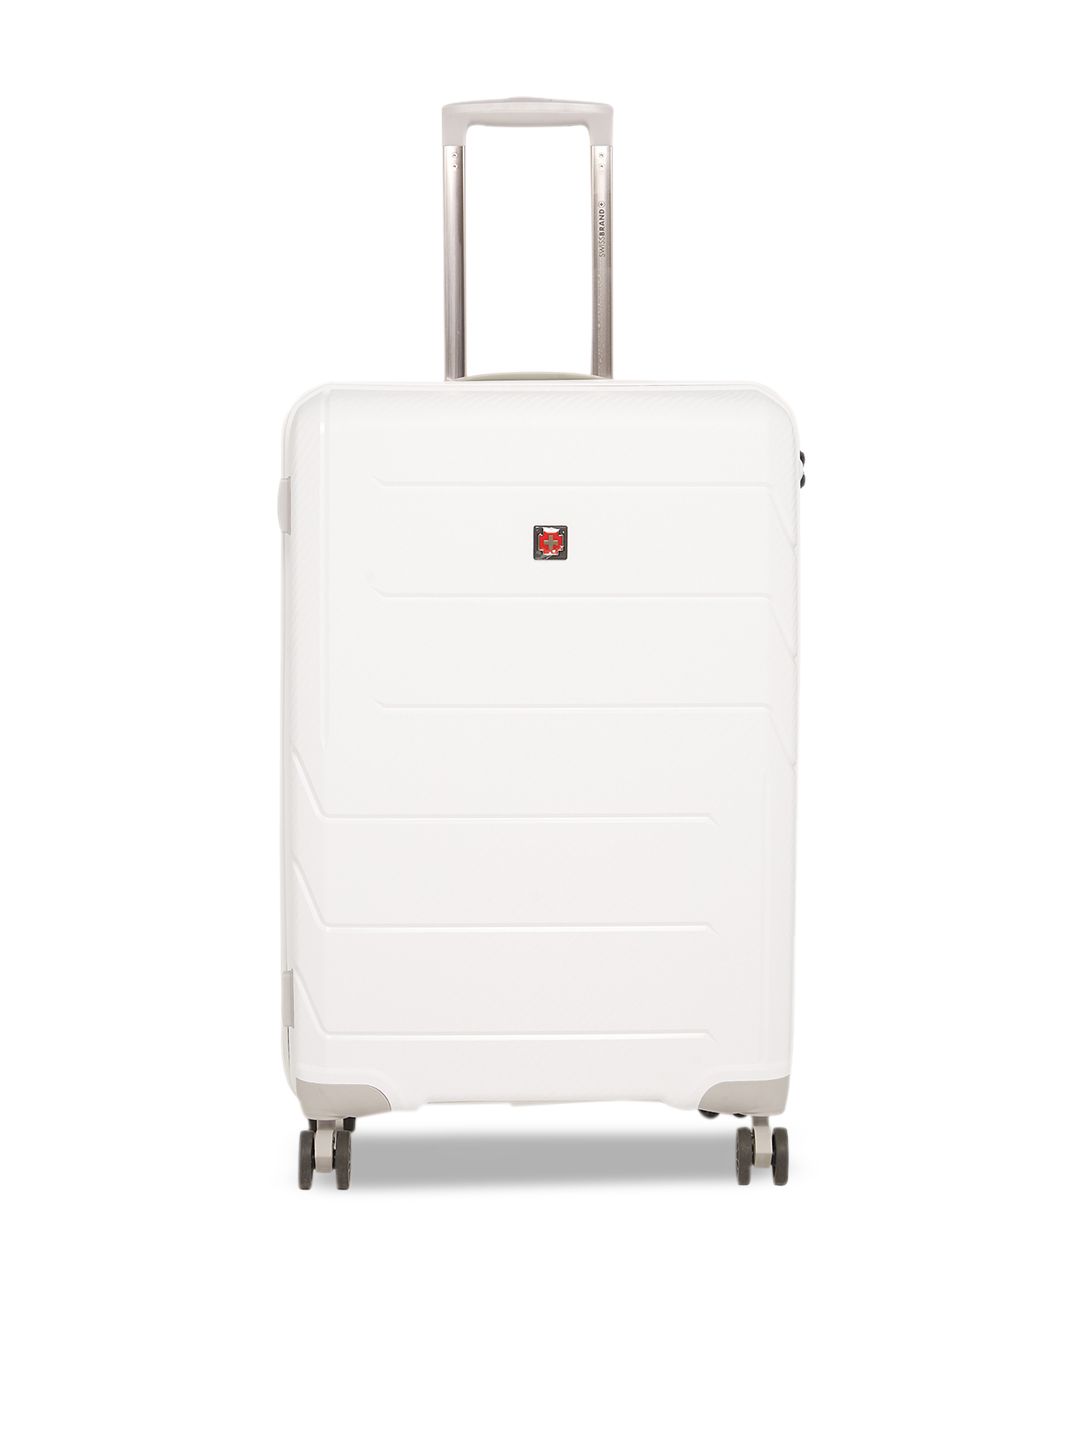 SWISS BRAND Unisex White Solid MATTERHORN 360-Degree Rotation Hard-Sided Medium Trolley Suitcase Price in India